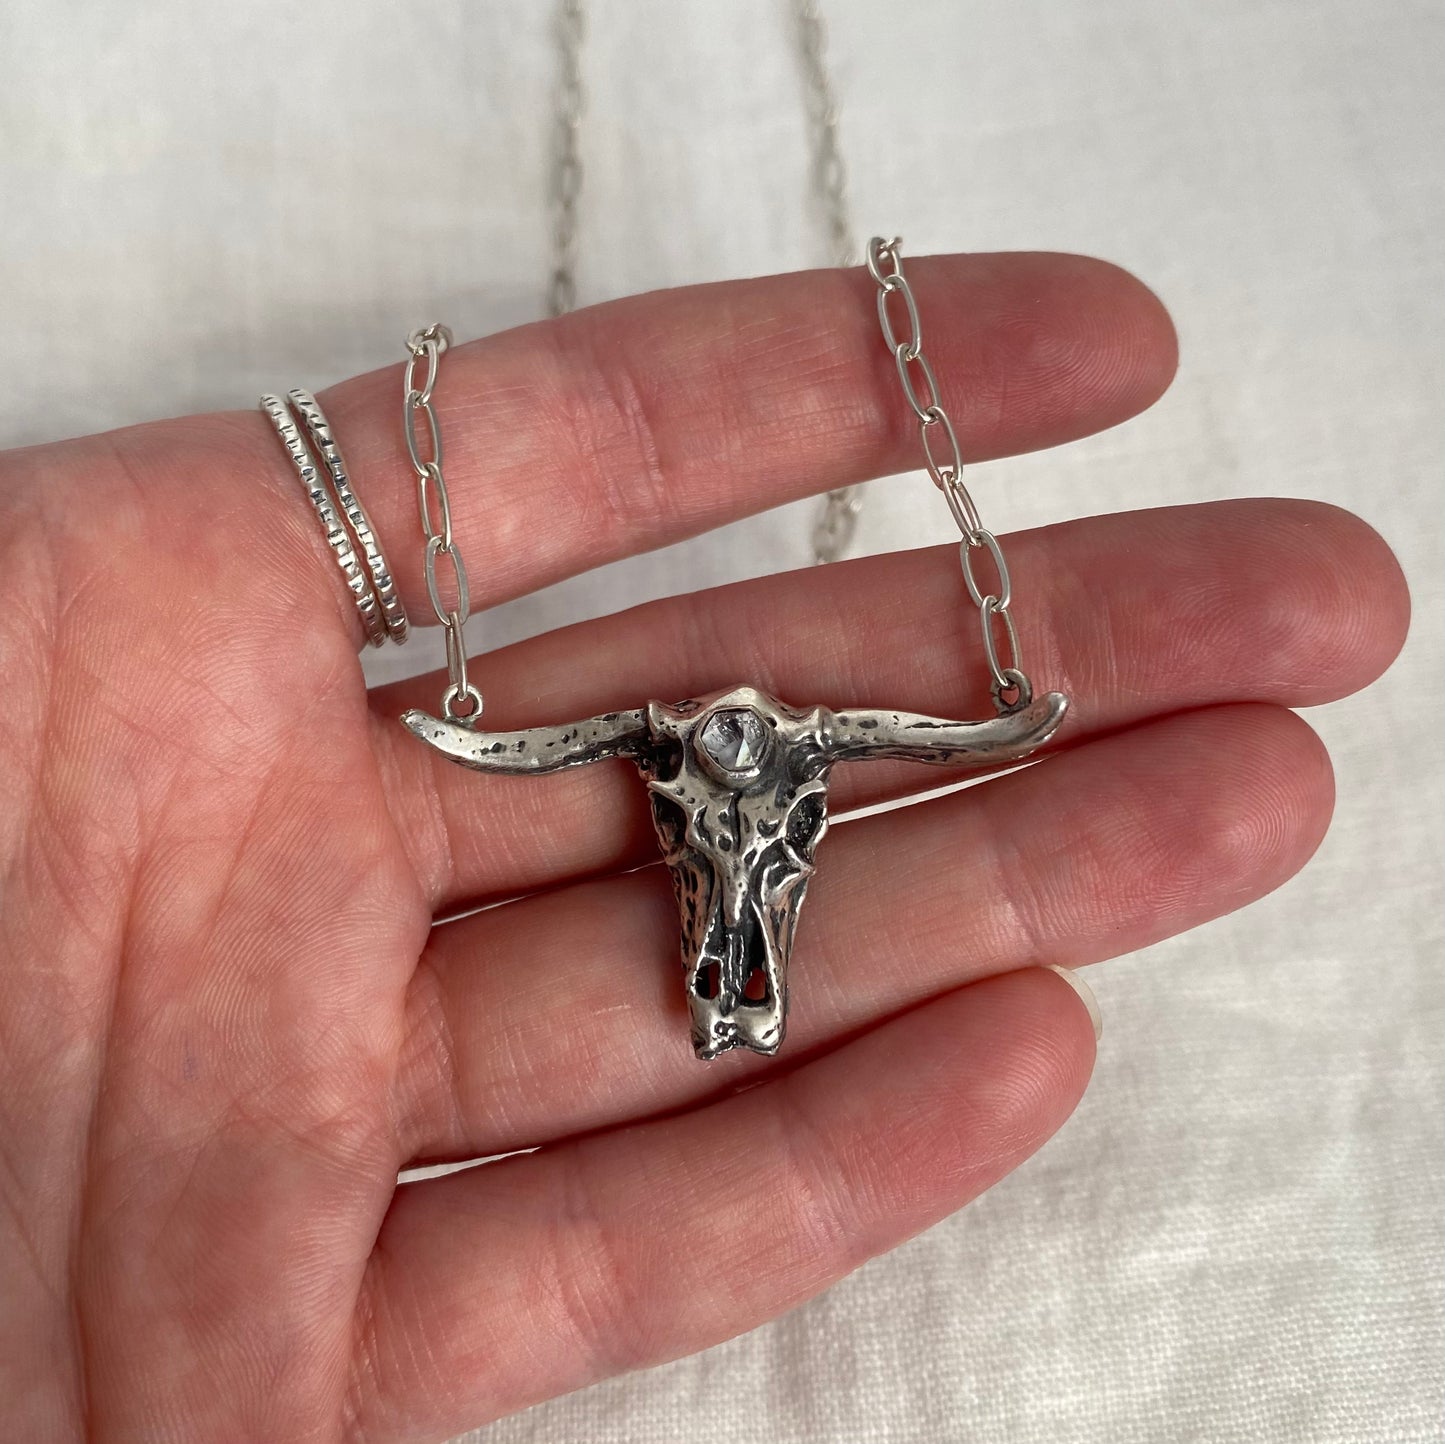 Silver Cow Skull Long Necklace with Herkimer Diamond Crystal Point